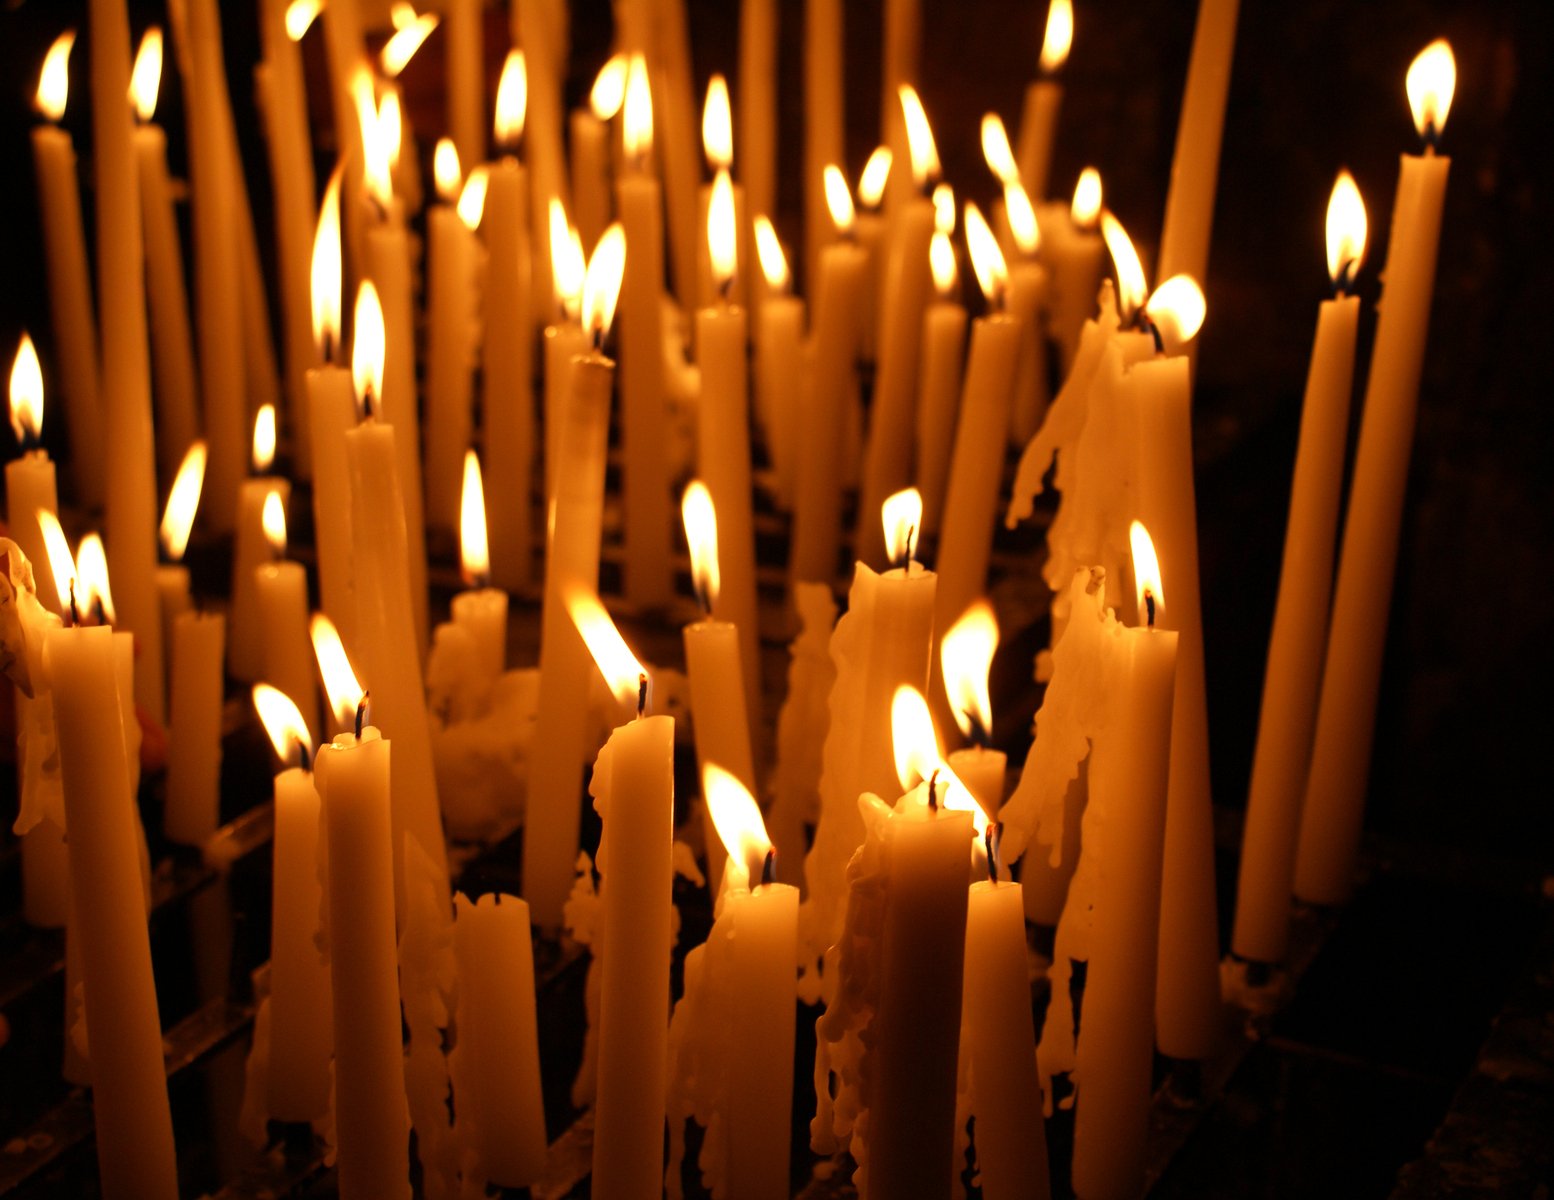 many lit candles in a dark room